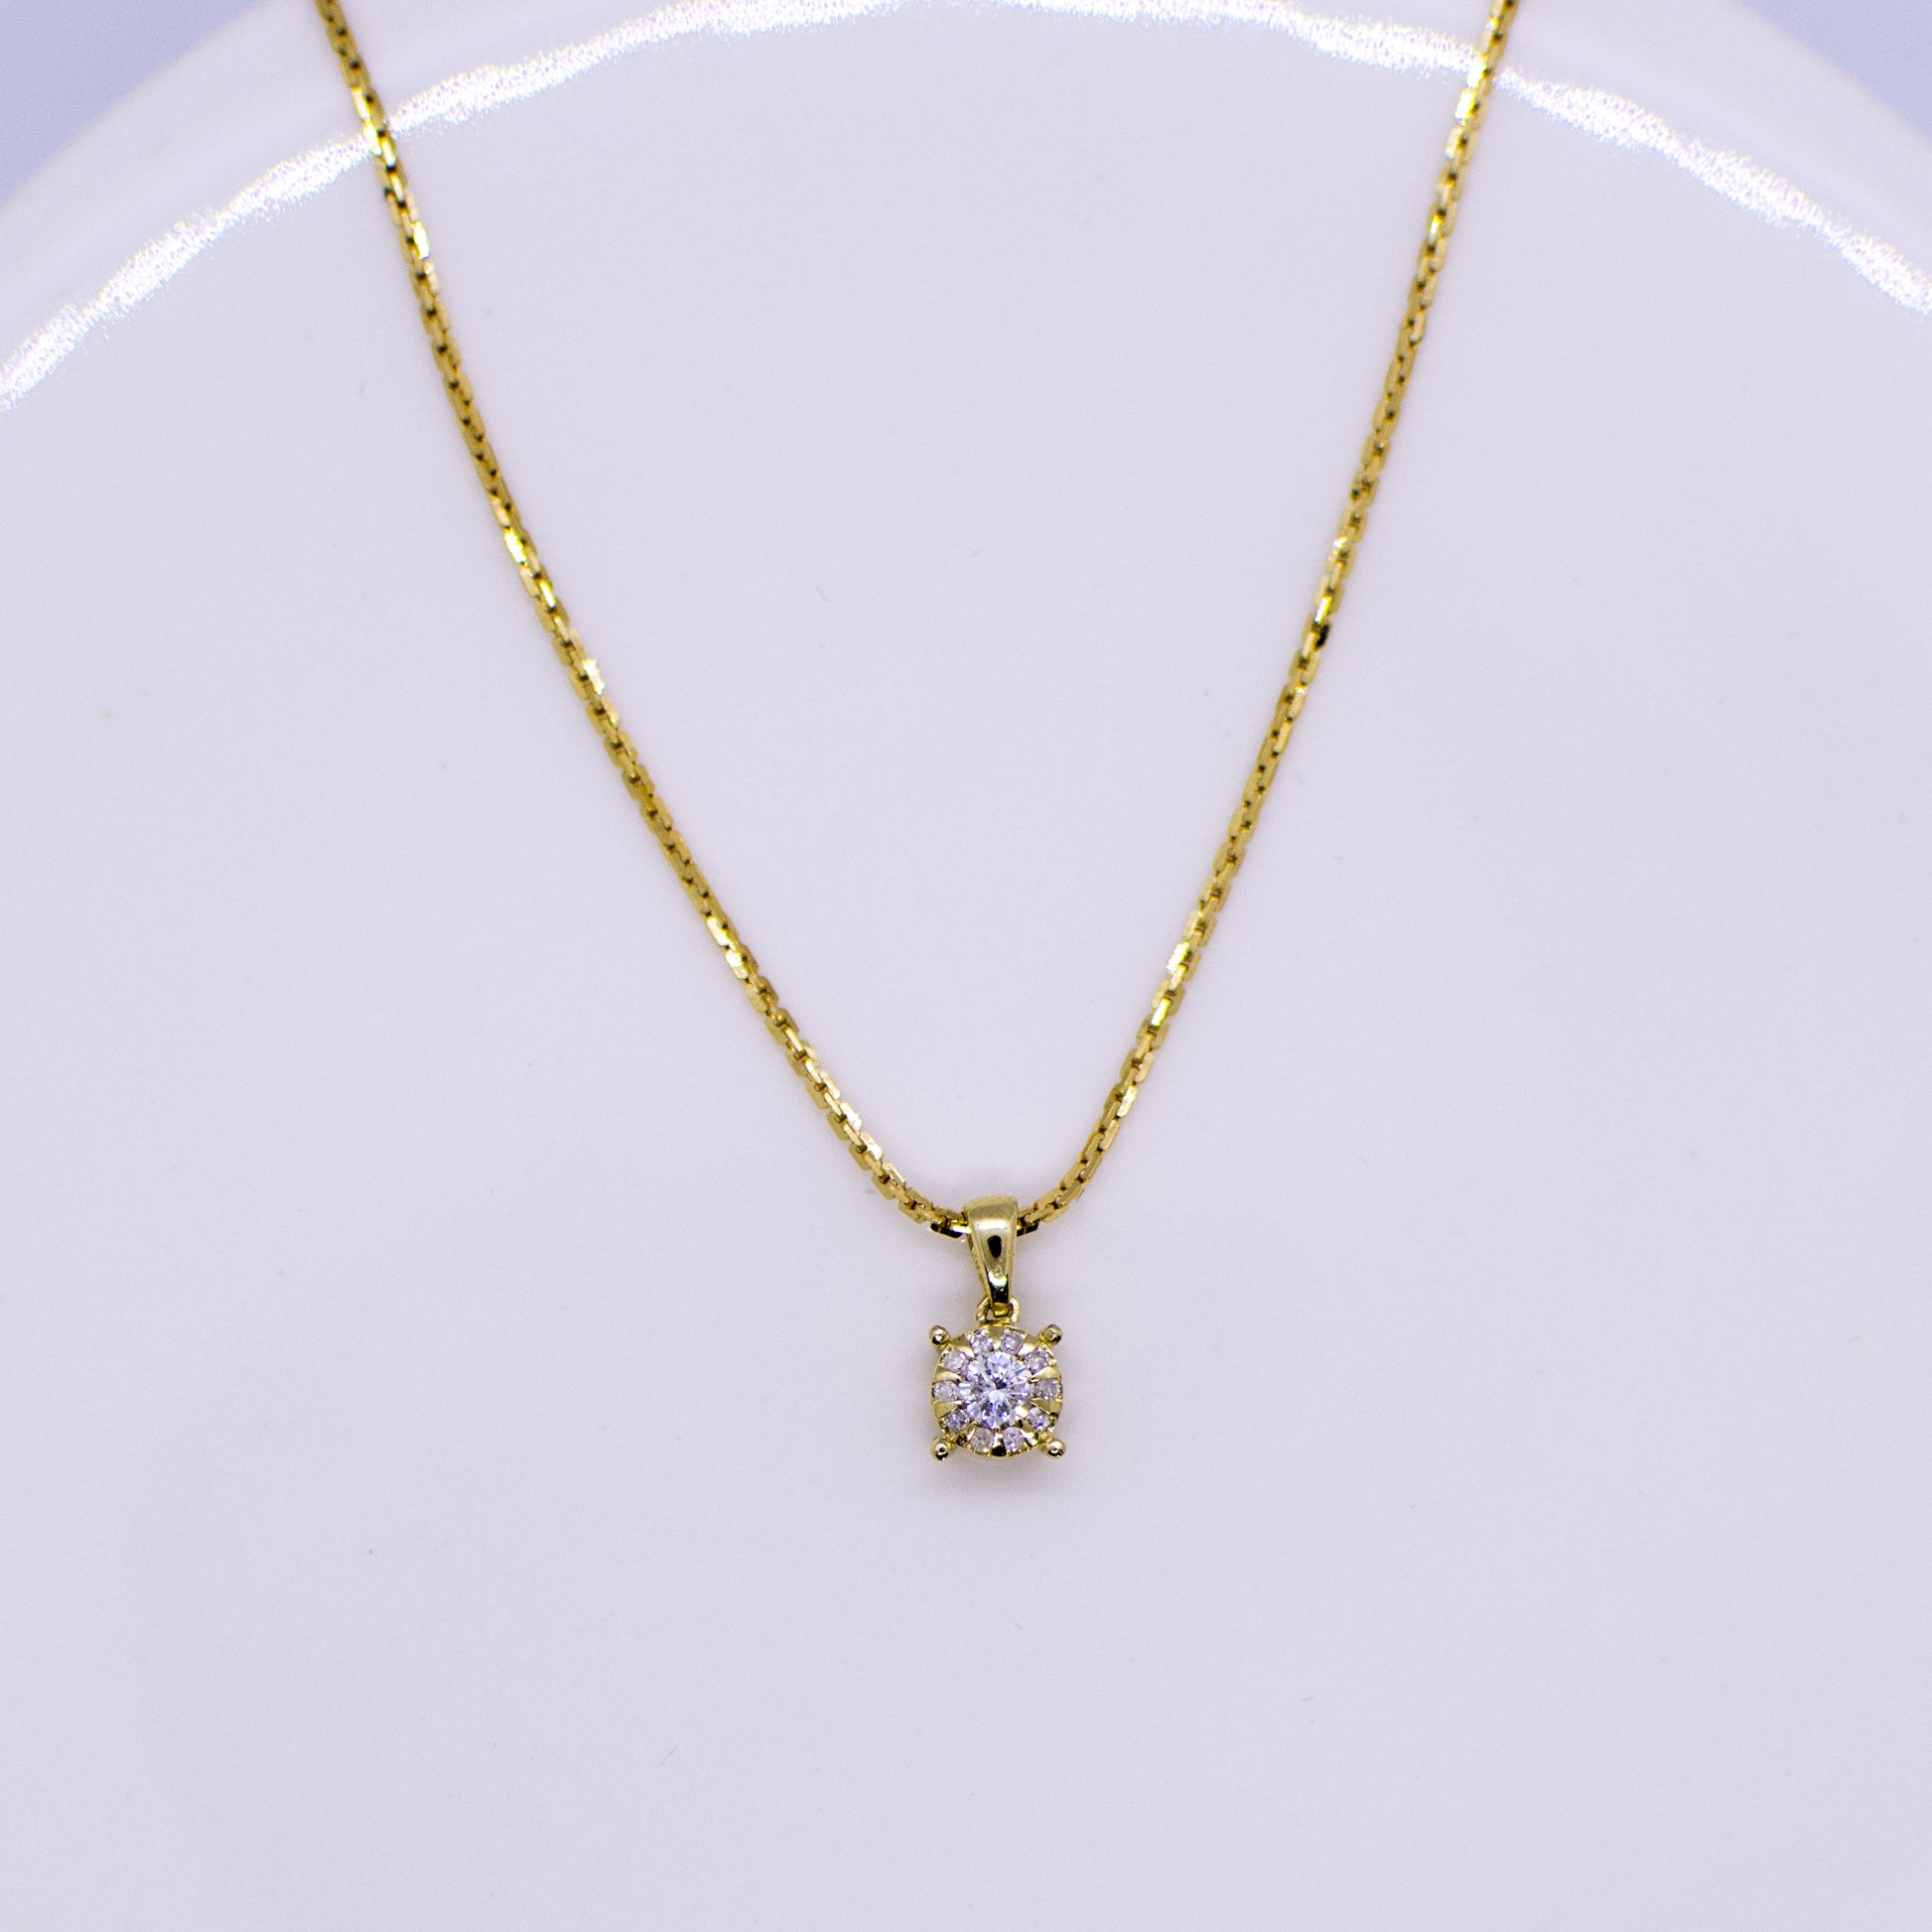 An illusion set round shaped pendant set with eleven round brilliant cut diamonds  9ct yellow gold 18" long 9ct yellow gold tight linked diamond cut square trace chain with lobster clasp.